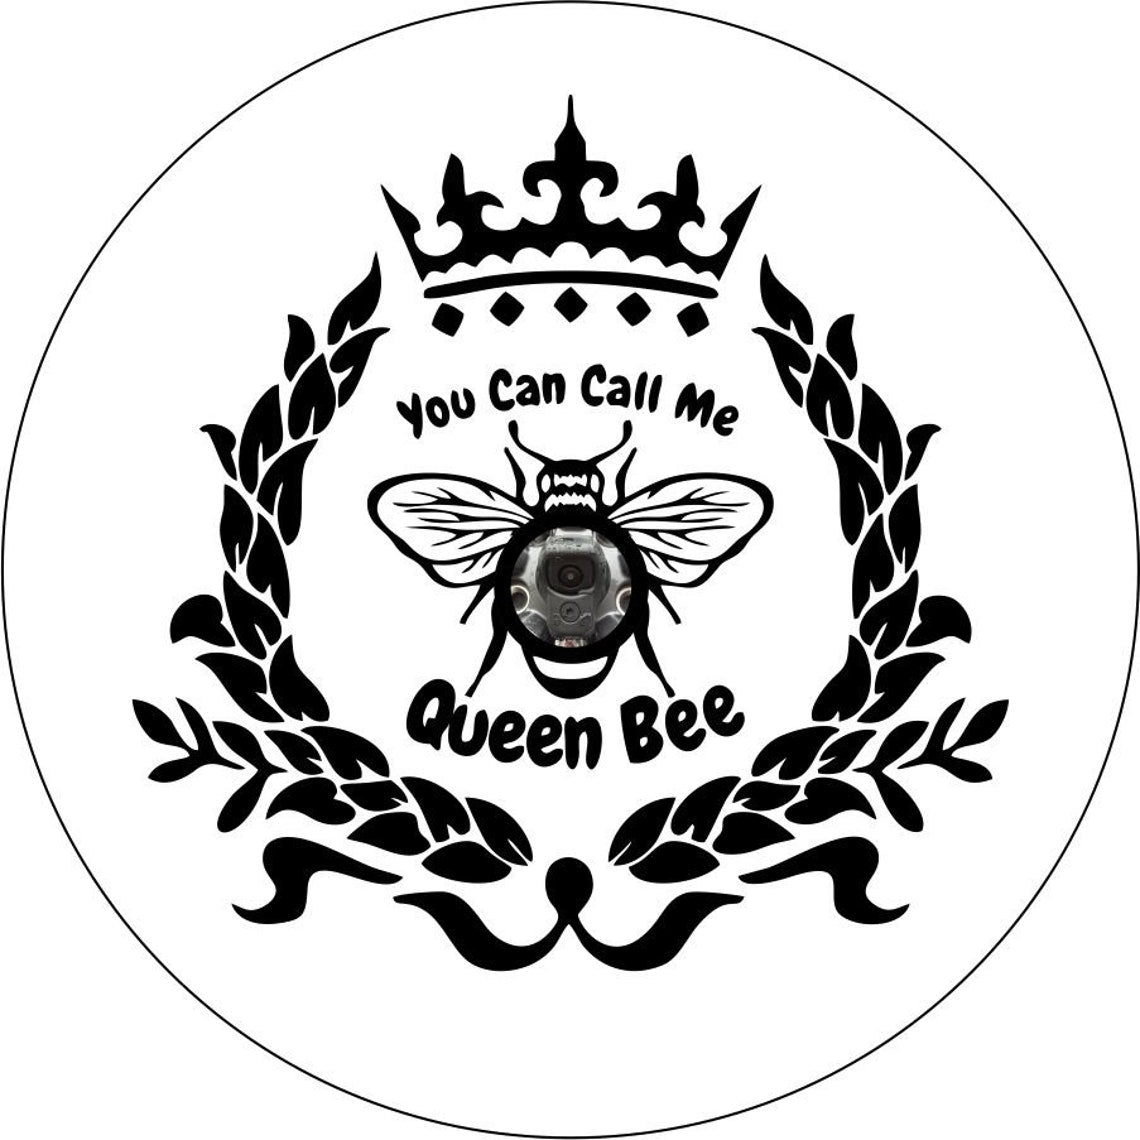 You can call me queen bee insignia design spare tire cover for Jeep, RV, Bronco, Camper, Trailer, and more on white vinyl with back up camera